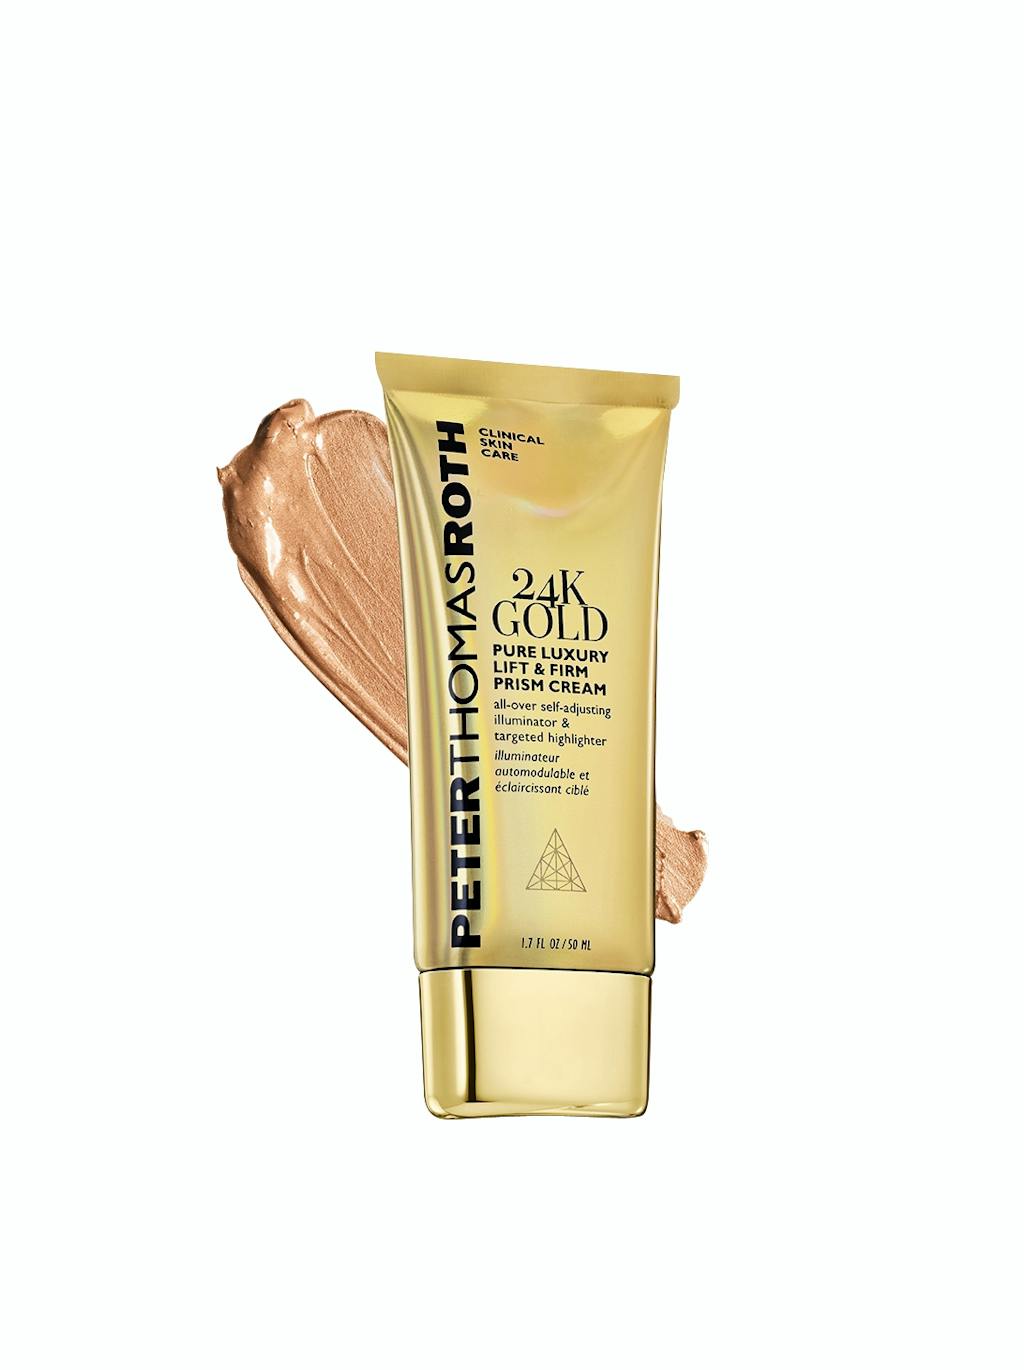 24k gold pure luxury lift & firm prism cream, Peter Thomas Roth 